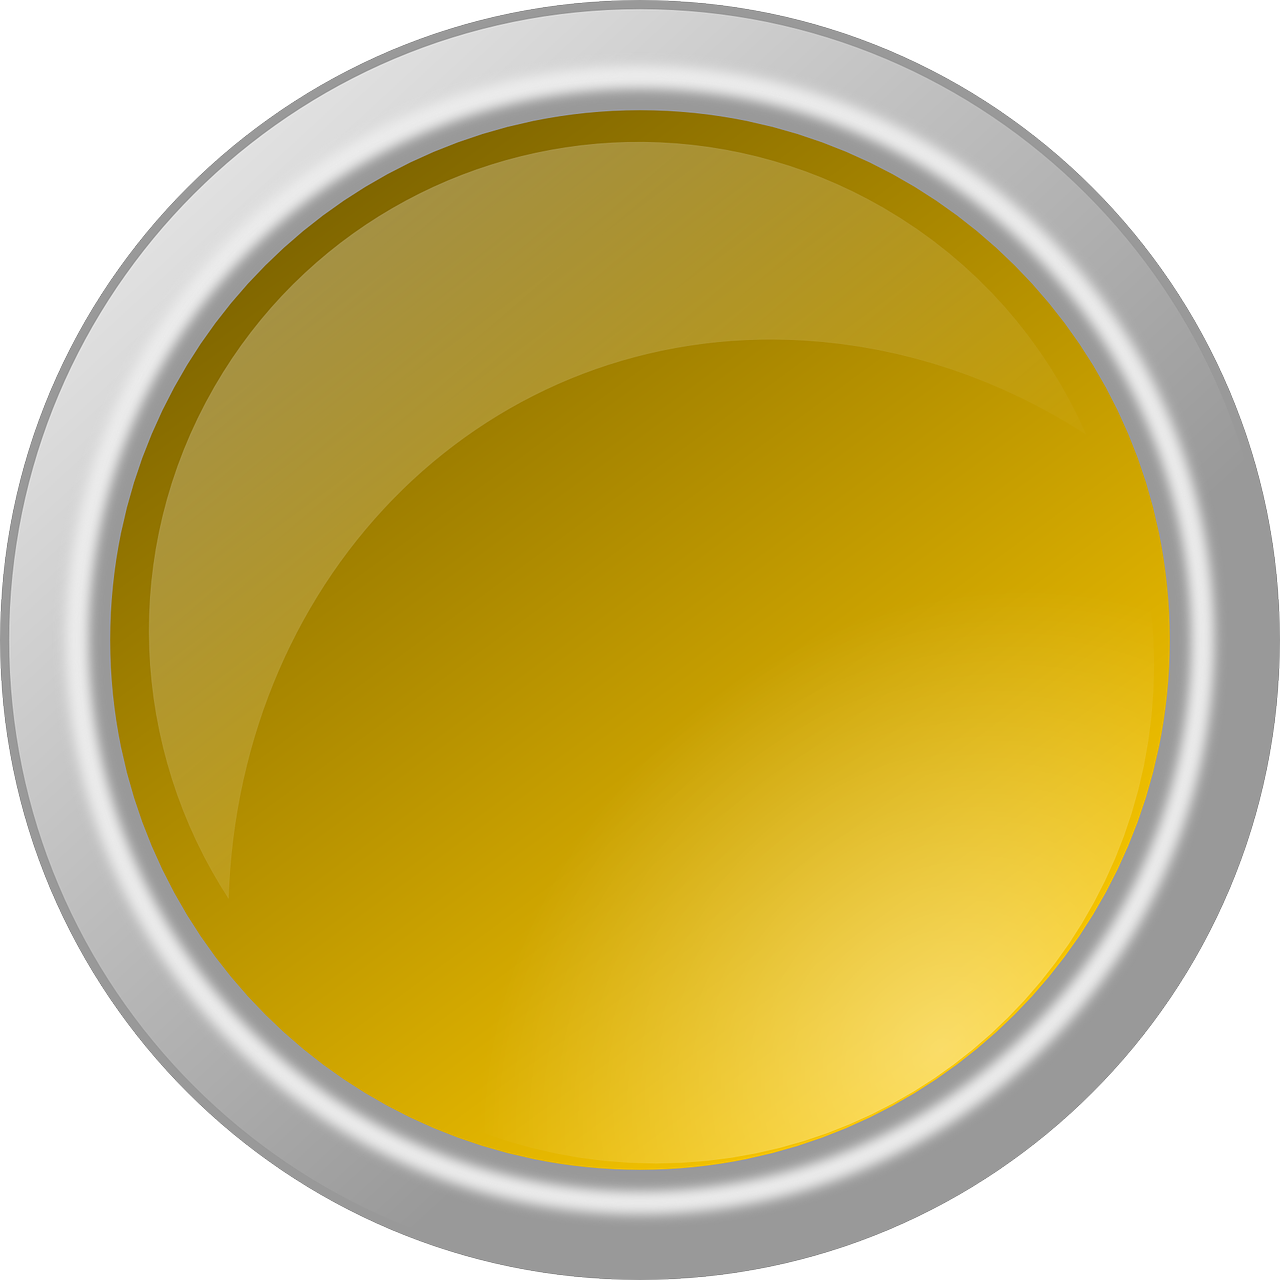 Download Button Glossy Round Circle Yellow Free Image From Needpix Com PSD Mockup Templates